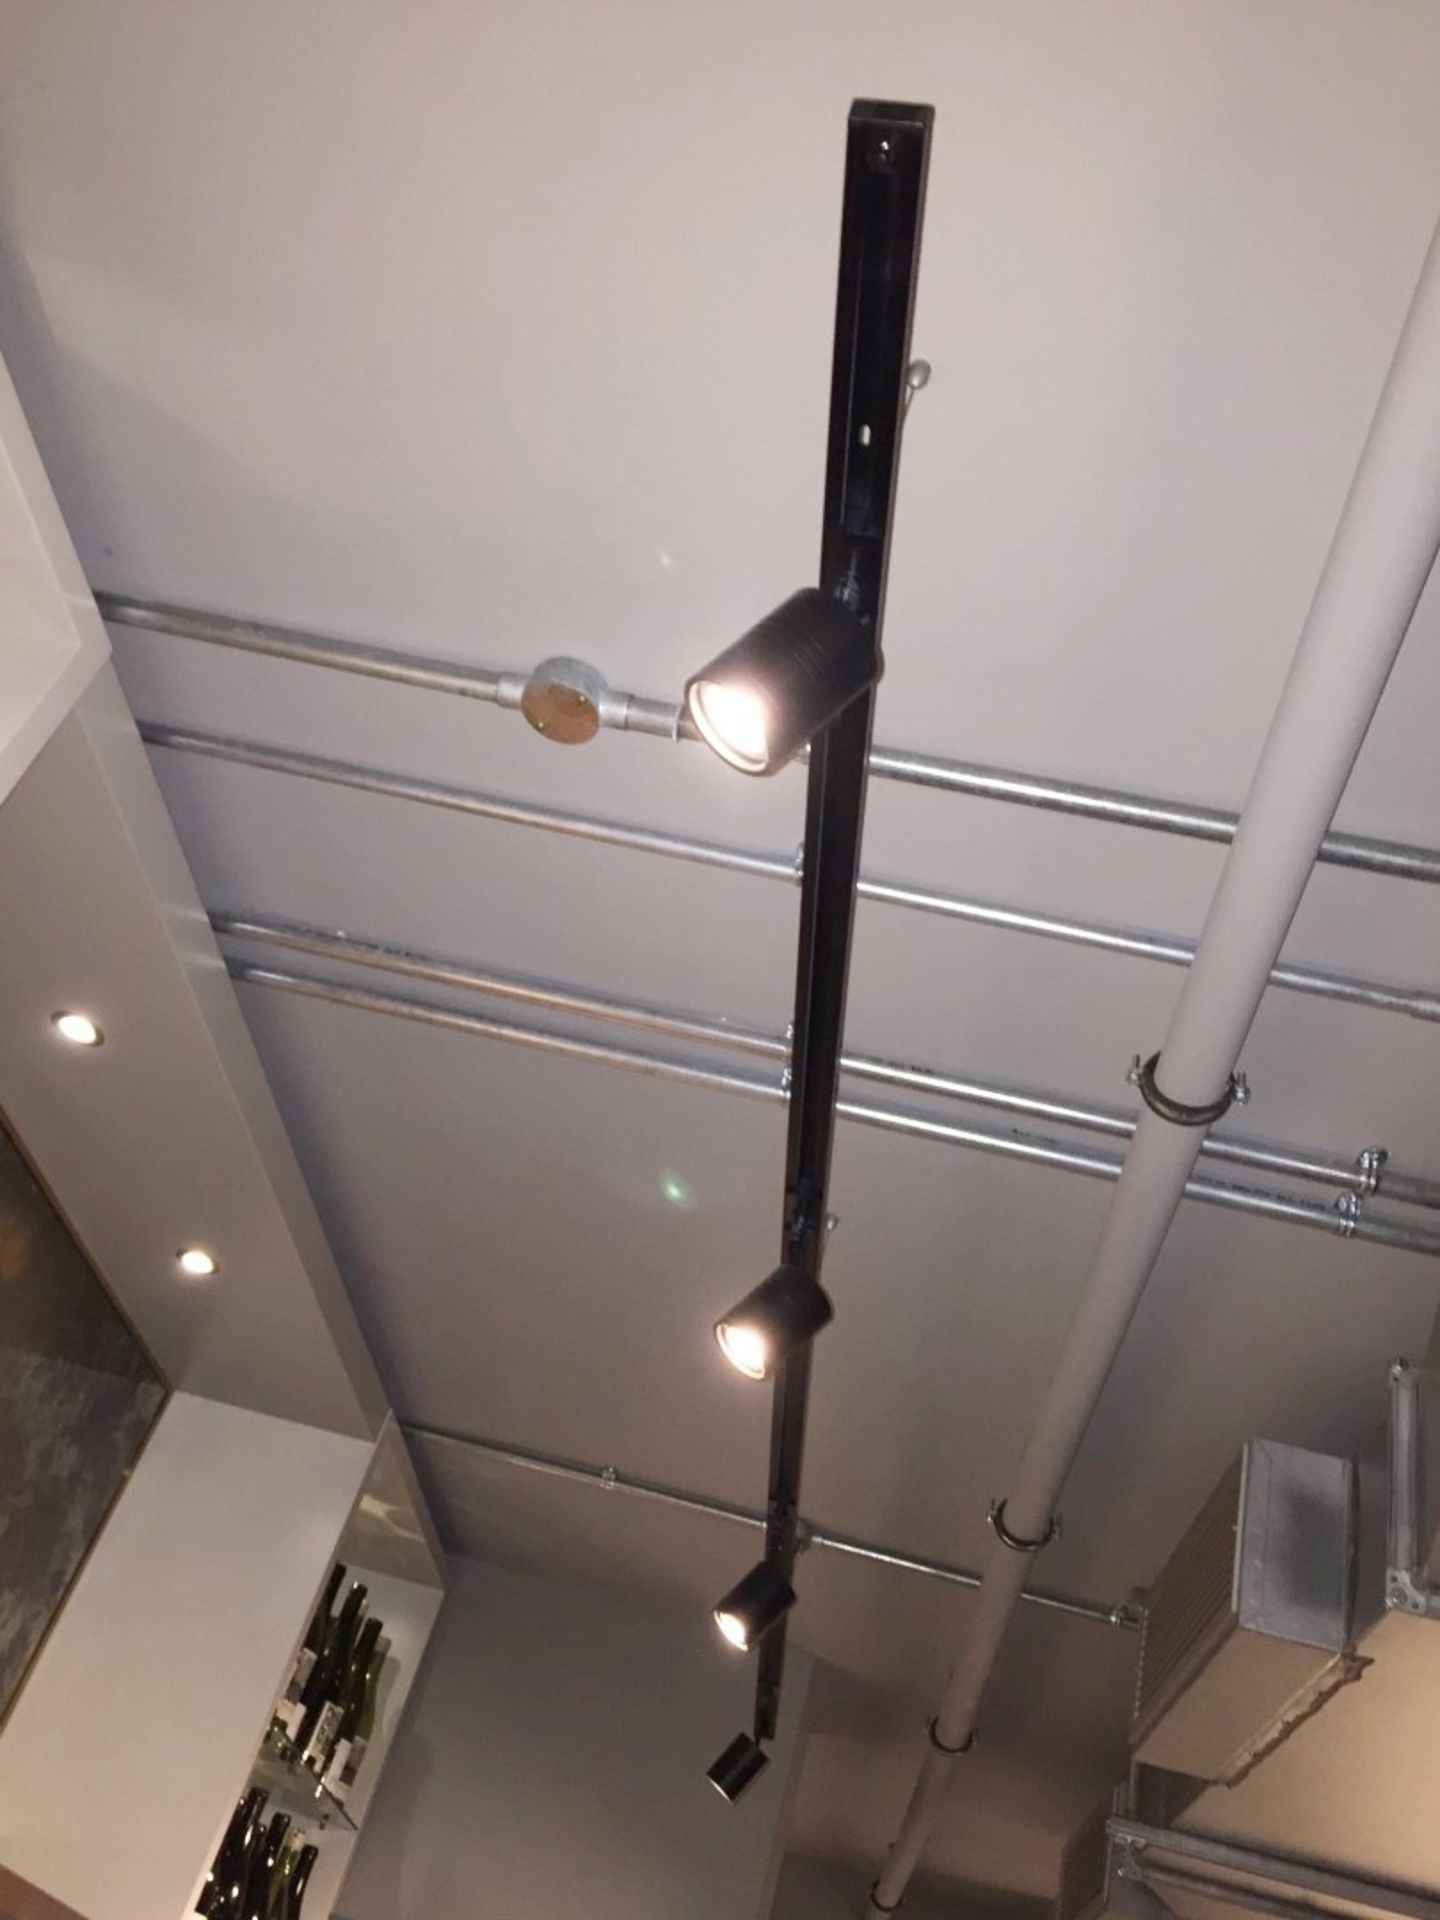 1 x Track Lighting With 4 Spot Lights - Approx 2.5 Metres In Length - Ref: WS/FF192 - Hotels,